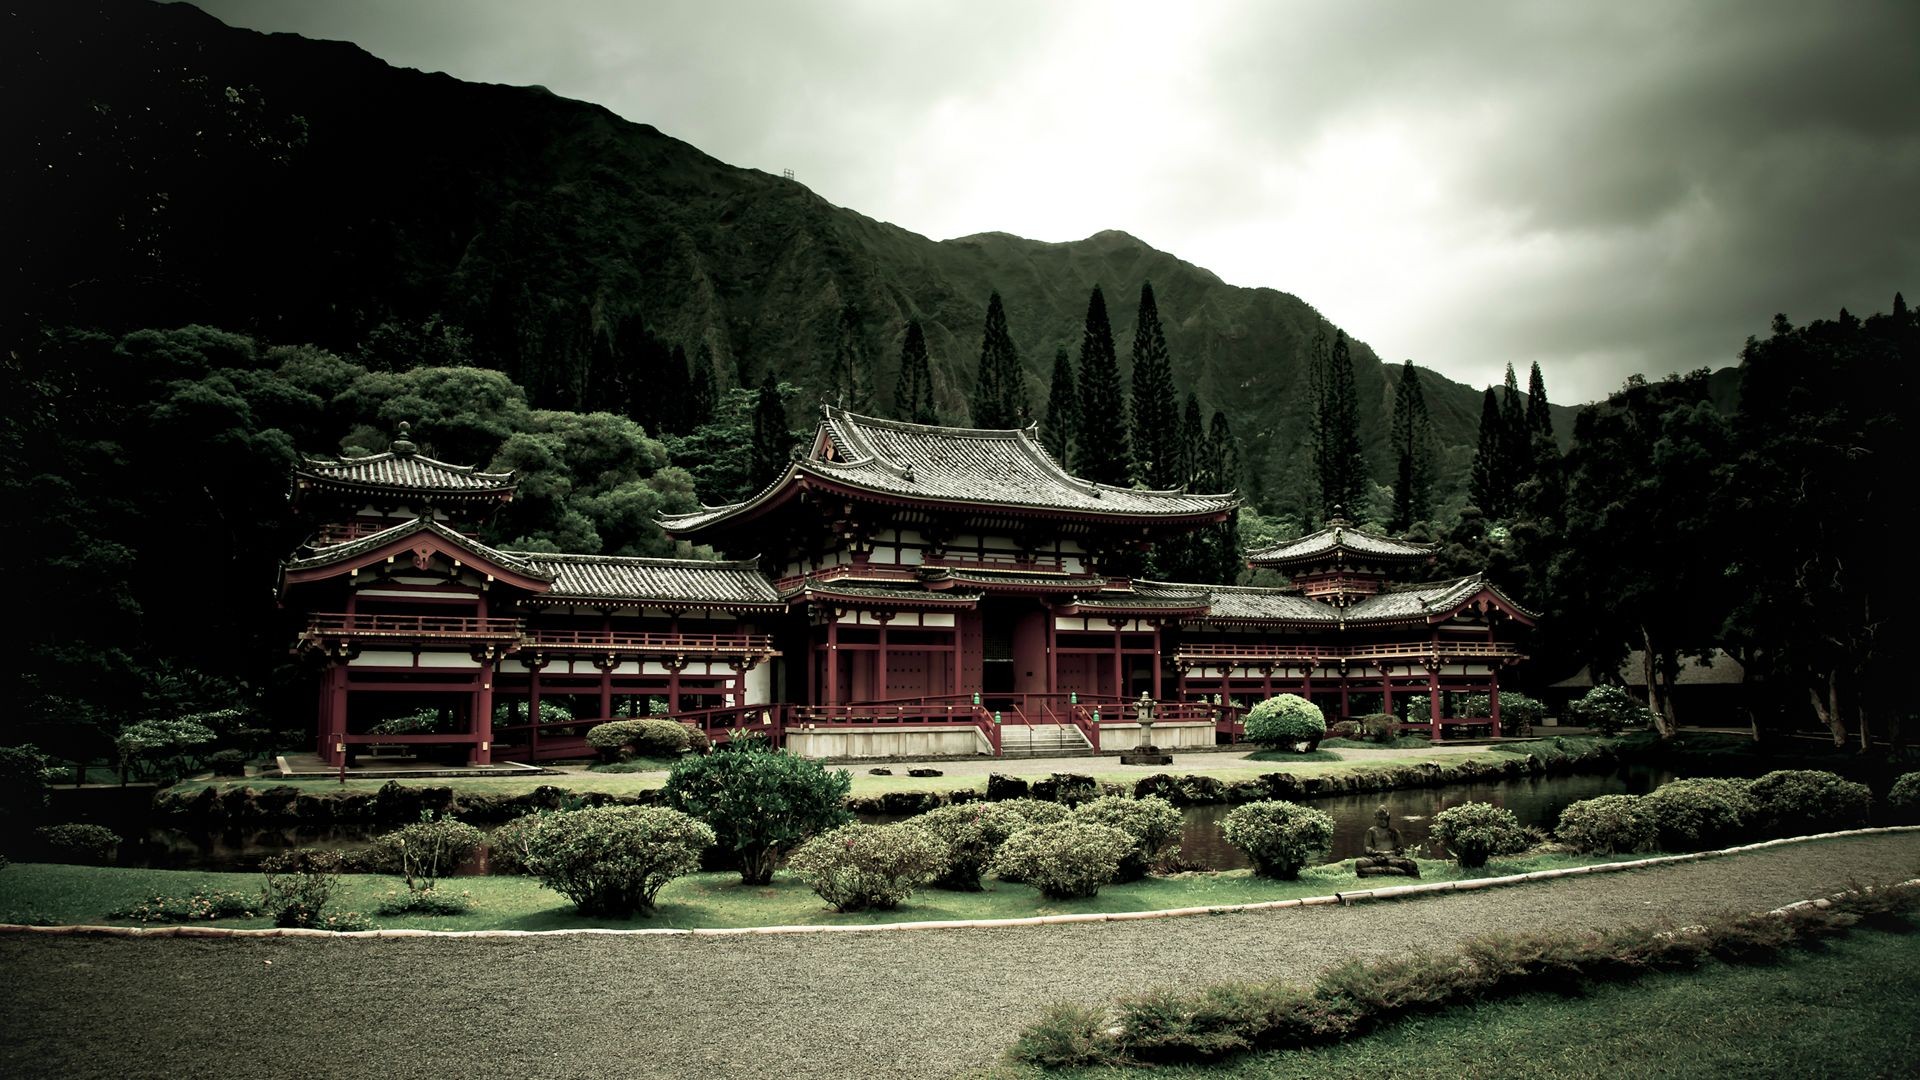 architecture, Building, Nature, Landscape, Trees, Asian architecture, Garden, Mountains, Path, Zen, Lake, Plants, Forest, Clouds, Temple, Japan, Filter, The Byodo In Temple Wallpaper